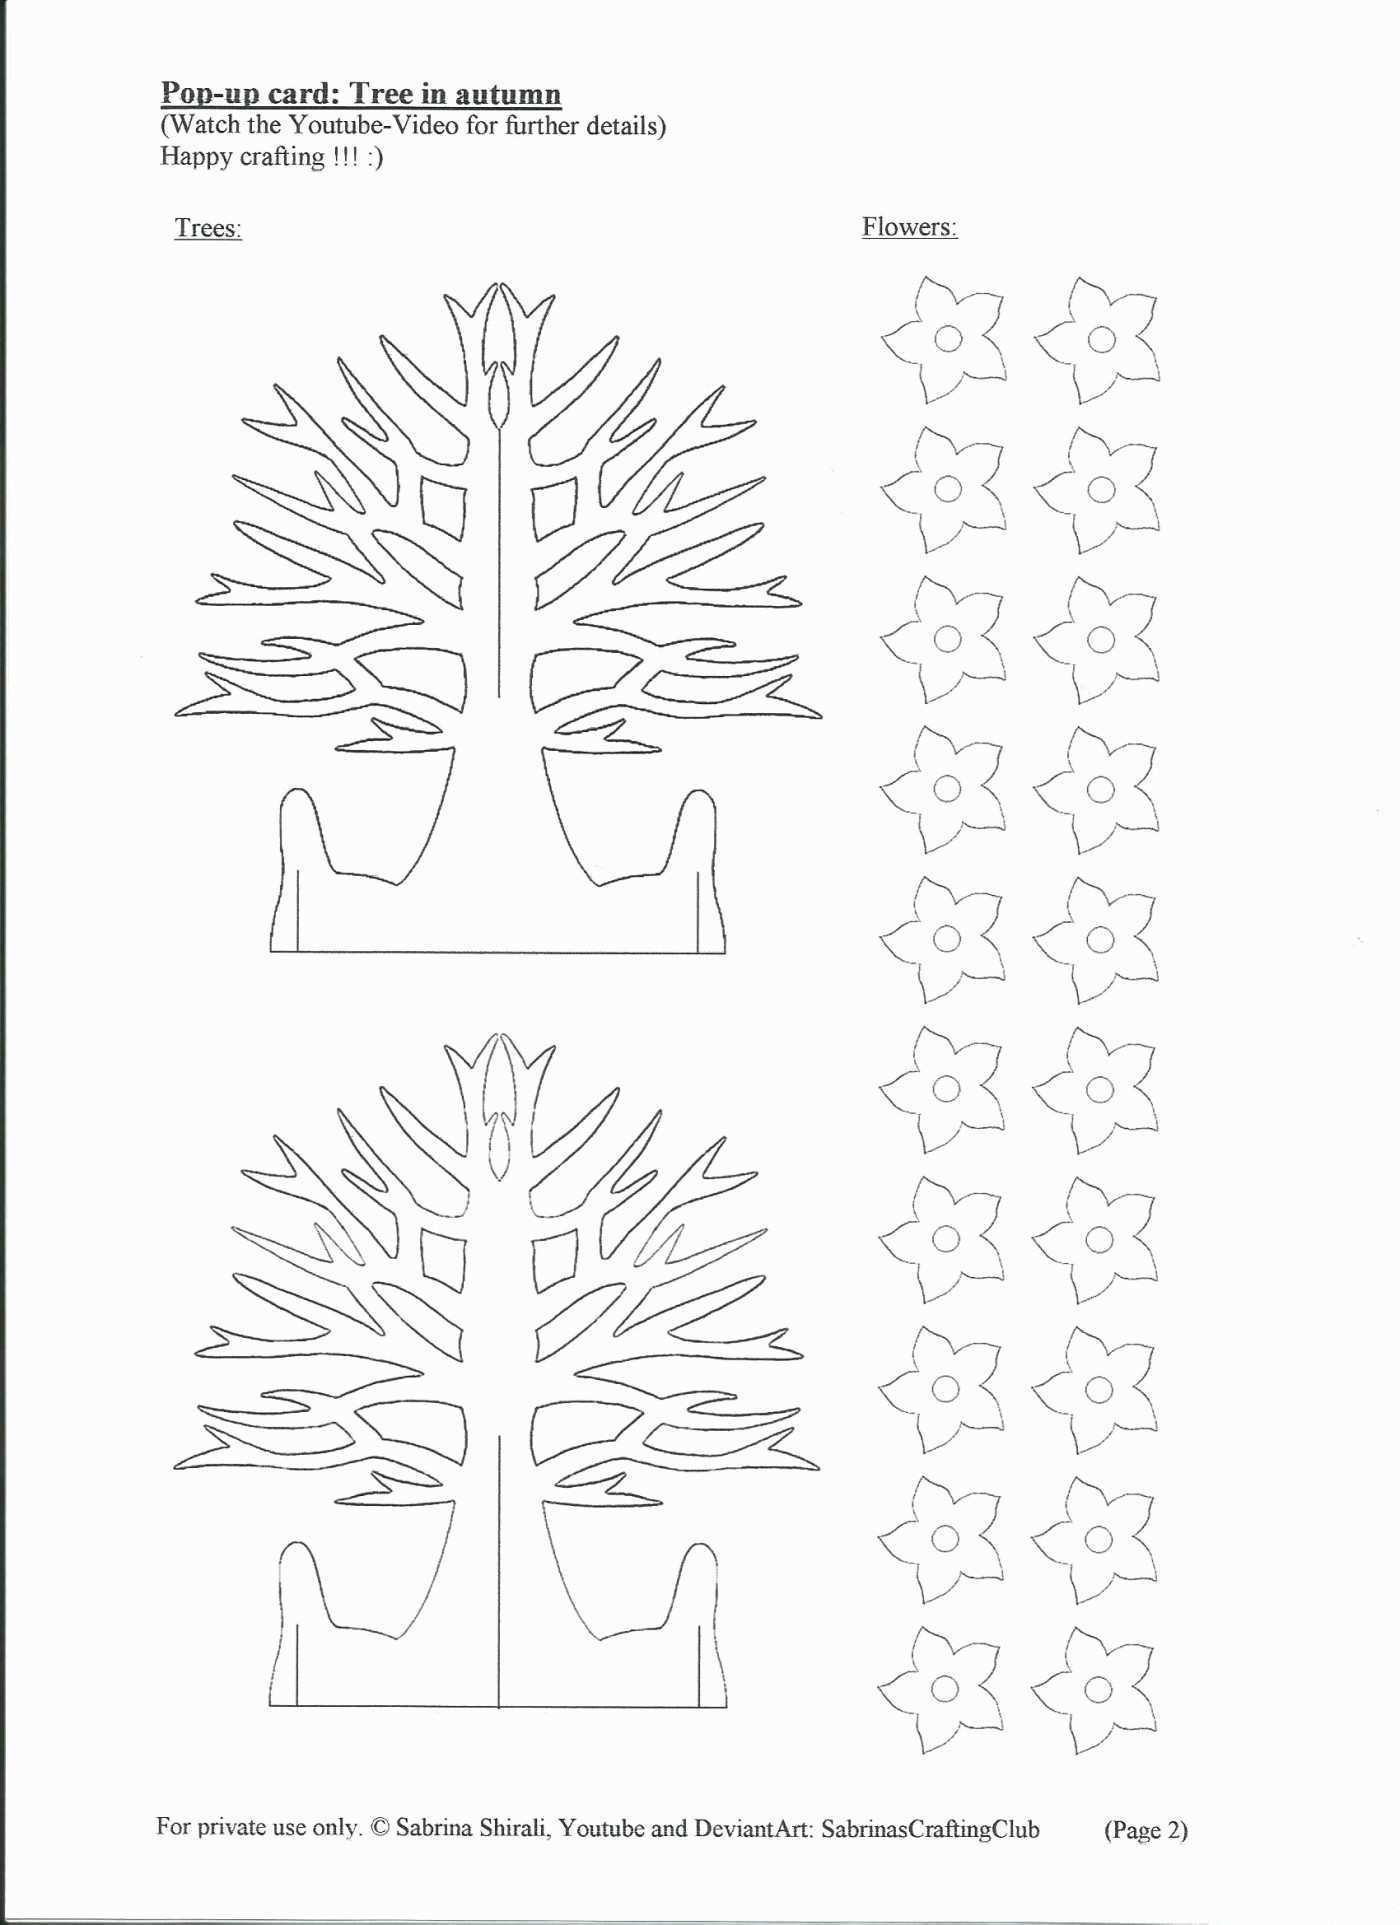 72 Free Printable Pop Up Card Templates Tree For Free by Pop Up Card